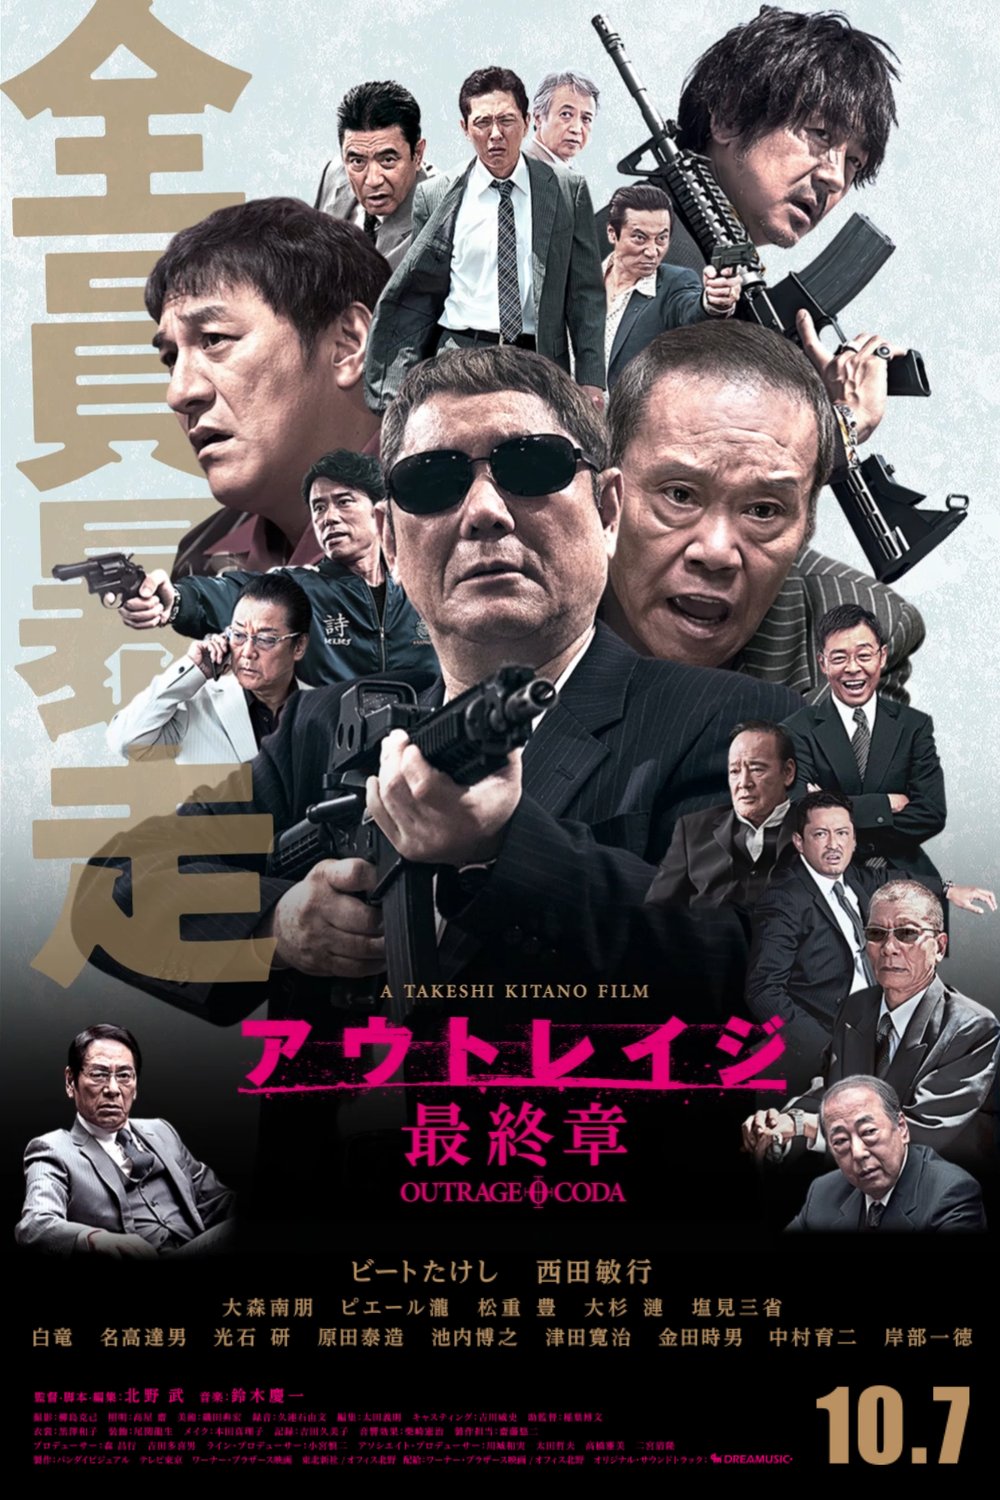 Japanese poster of the movie Outrage Coda